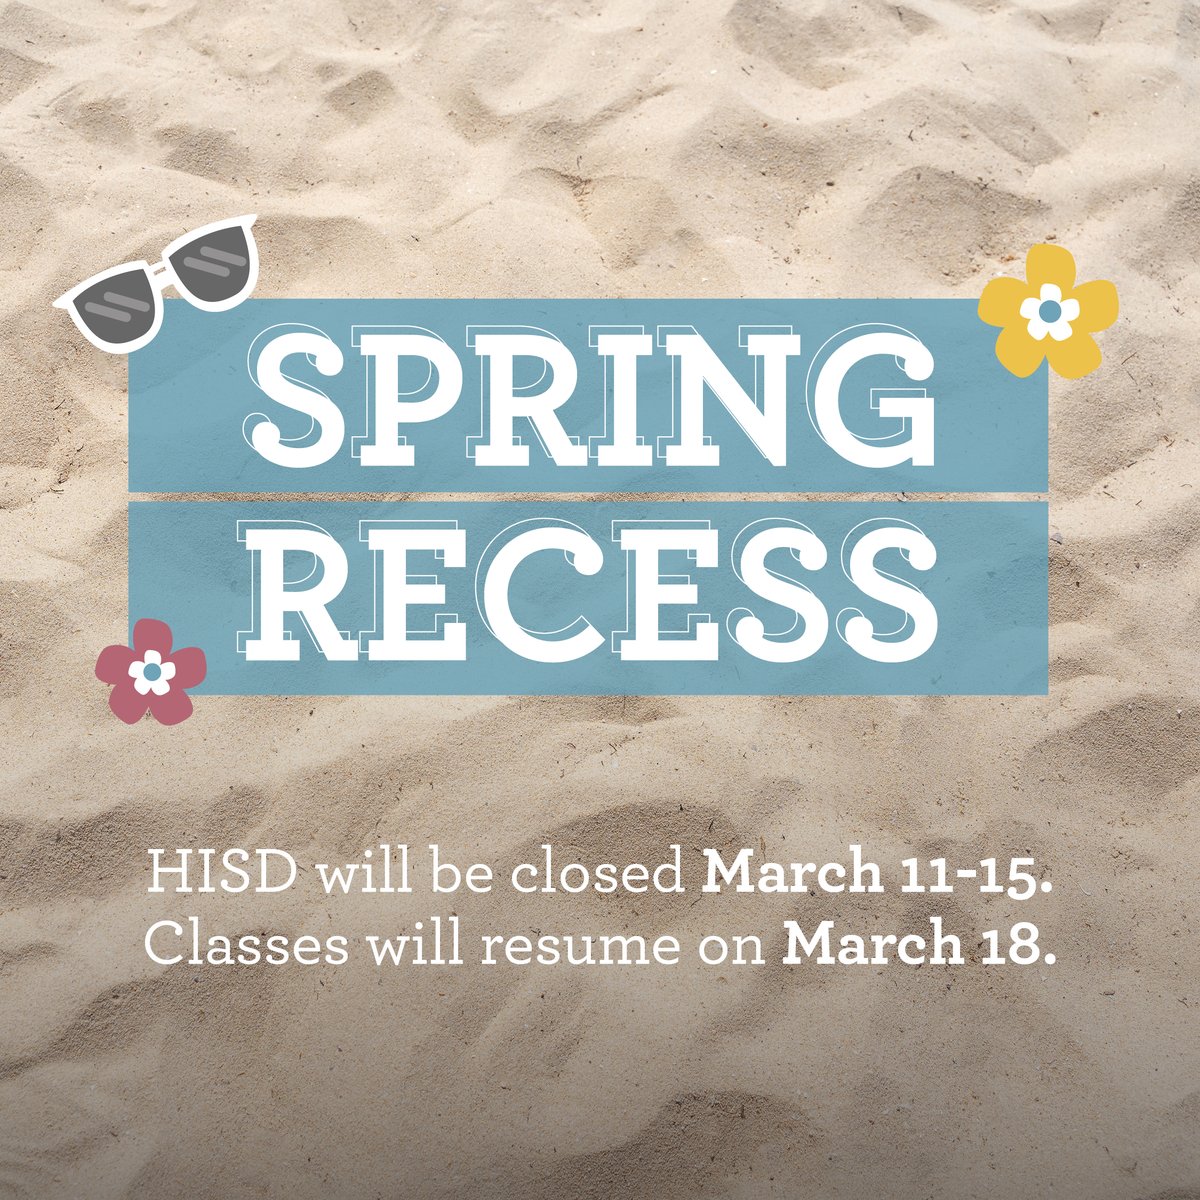 Reminder to our HISD community: The District will be closed for Spring Break beginning Monday, March 11, through Friday, March 15. Students and staff will return on Monday, March 18.